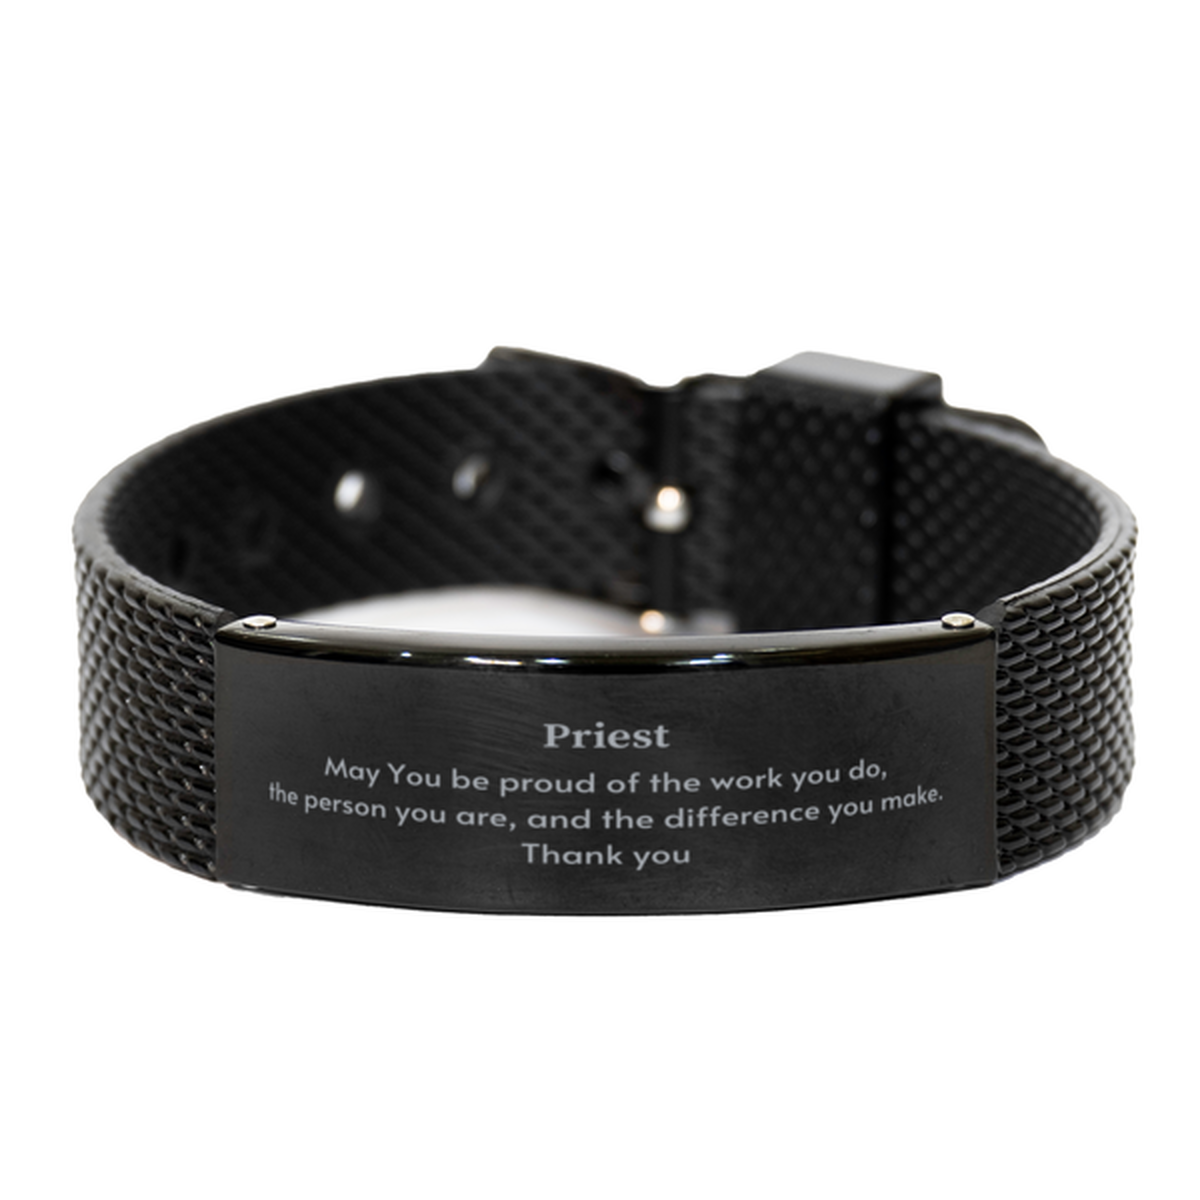 Heartwarming Black Shark Mesh Bracelet Retirement Coworkers Gifts for Priest, Priest May You be proud of the work you do, the person you are Gifts for Boss Men Women Friends